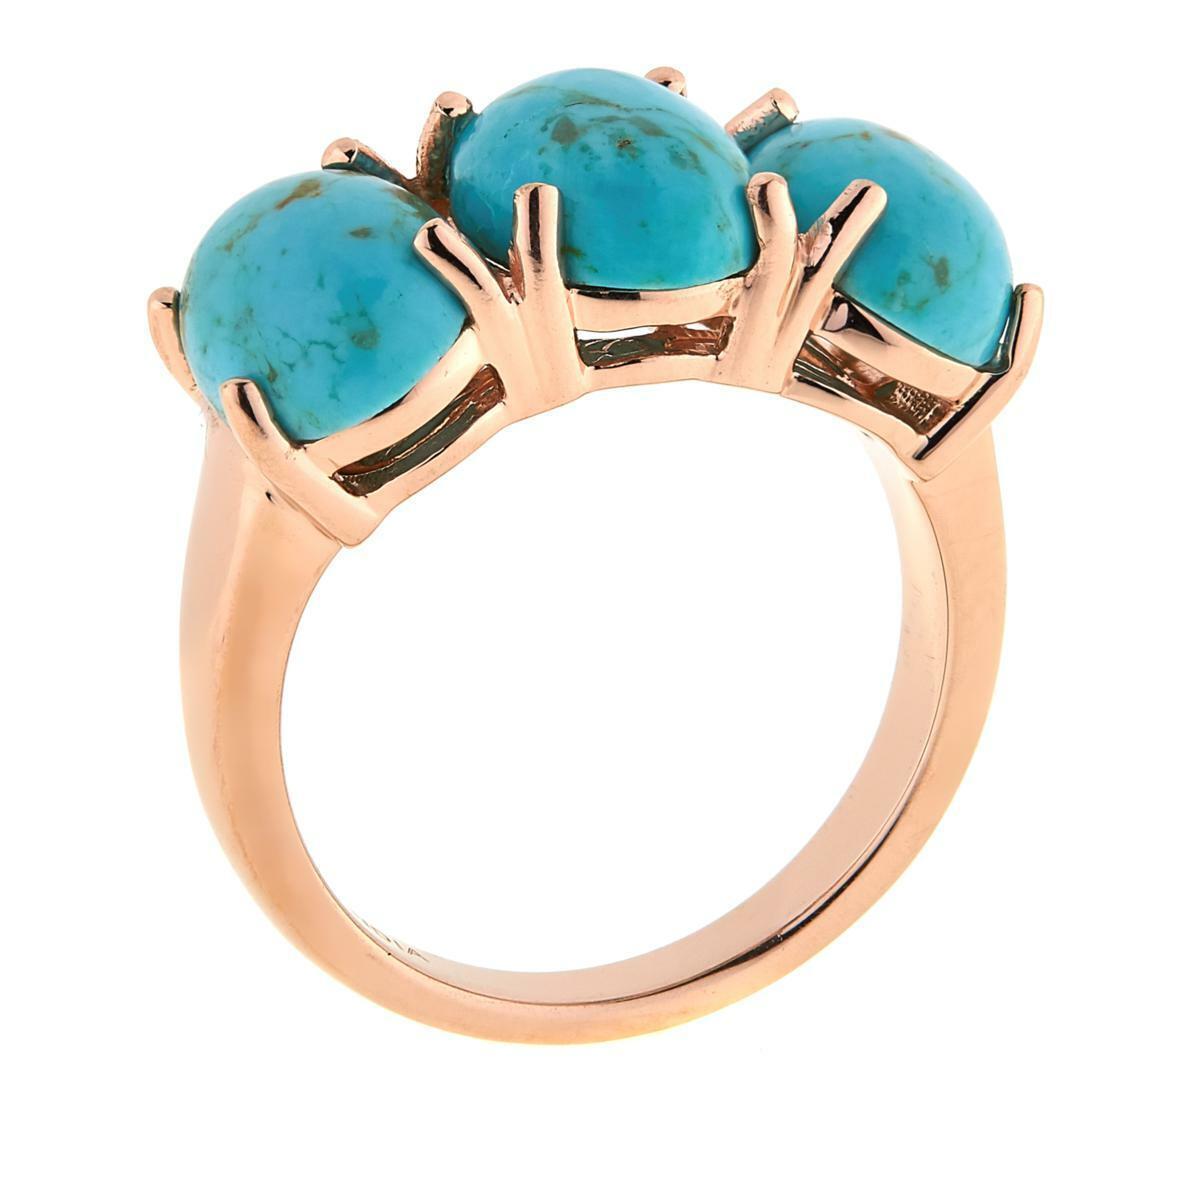 Paul Deasy Gem Rose Gold Plated 3-Stone Kingman Turquoise Ring Size 7 Hsn $101